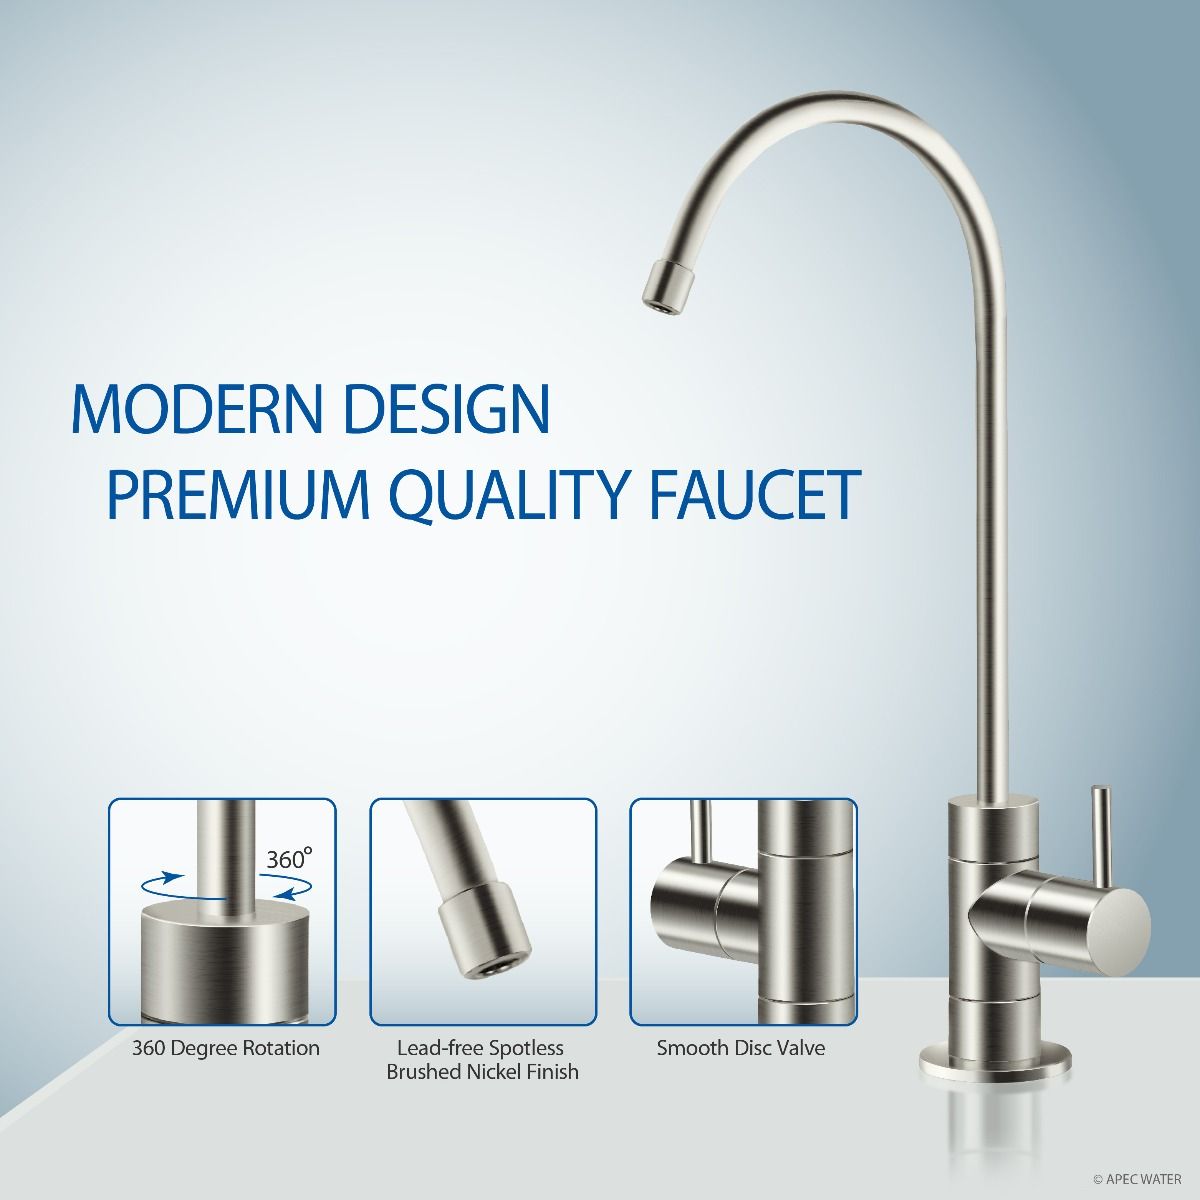 APEC Luxury Designer Faucet with Tubing Attached - Brushed Nickel, Lead-Free